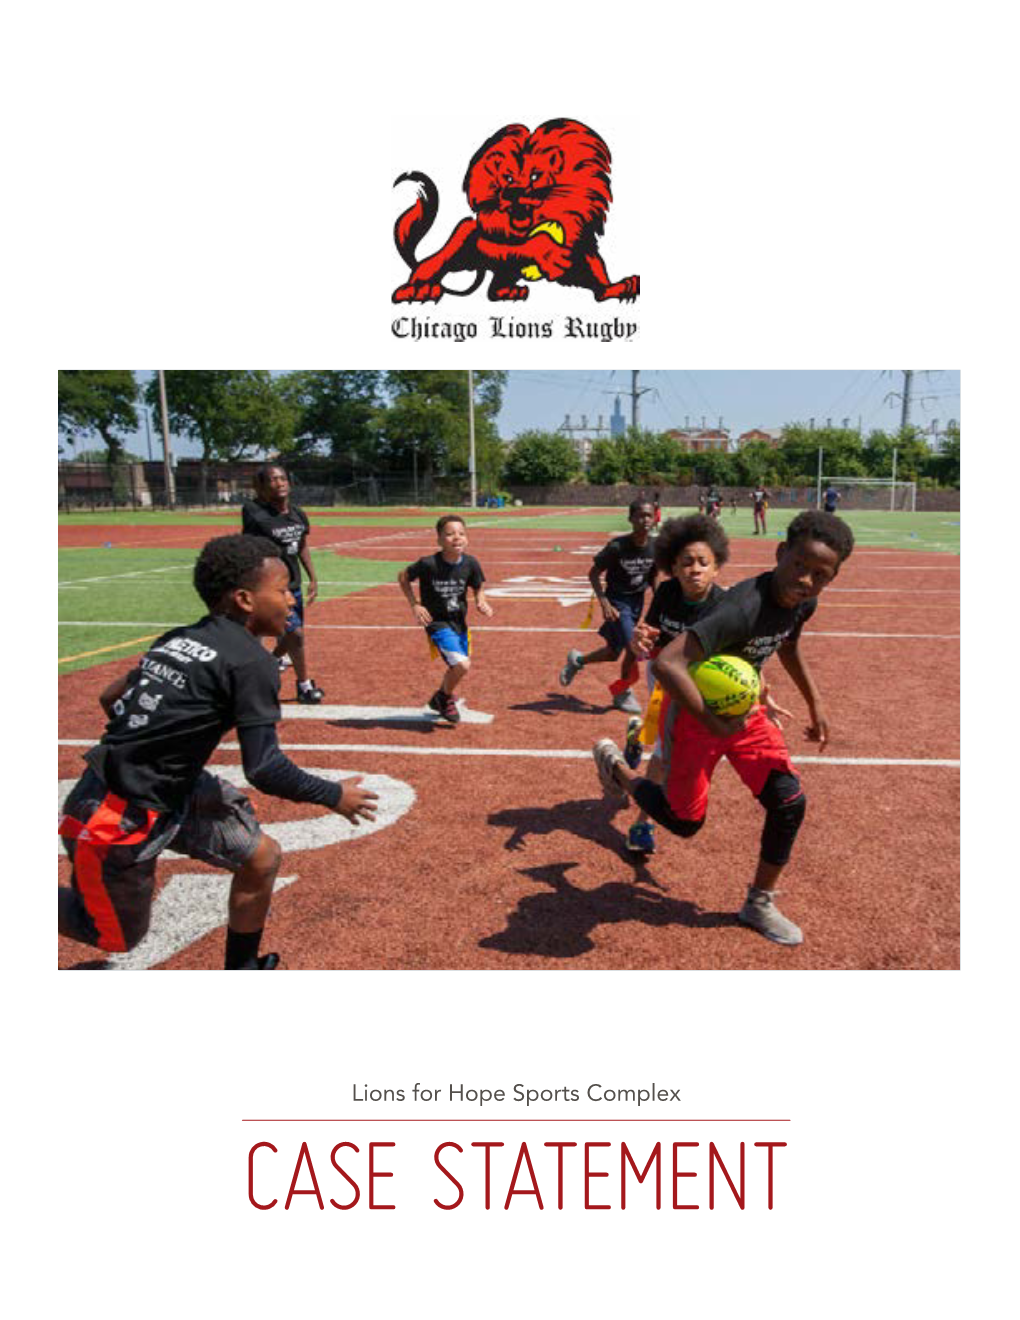 Chicago Lions Rugby Has Adopted the Vision That Hope Has Developed to Expand Beyond High School Into the Middle Schools to Create Its Own Youth Programs